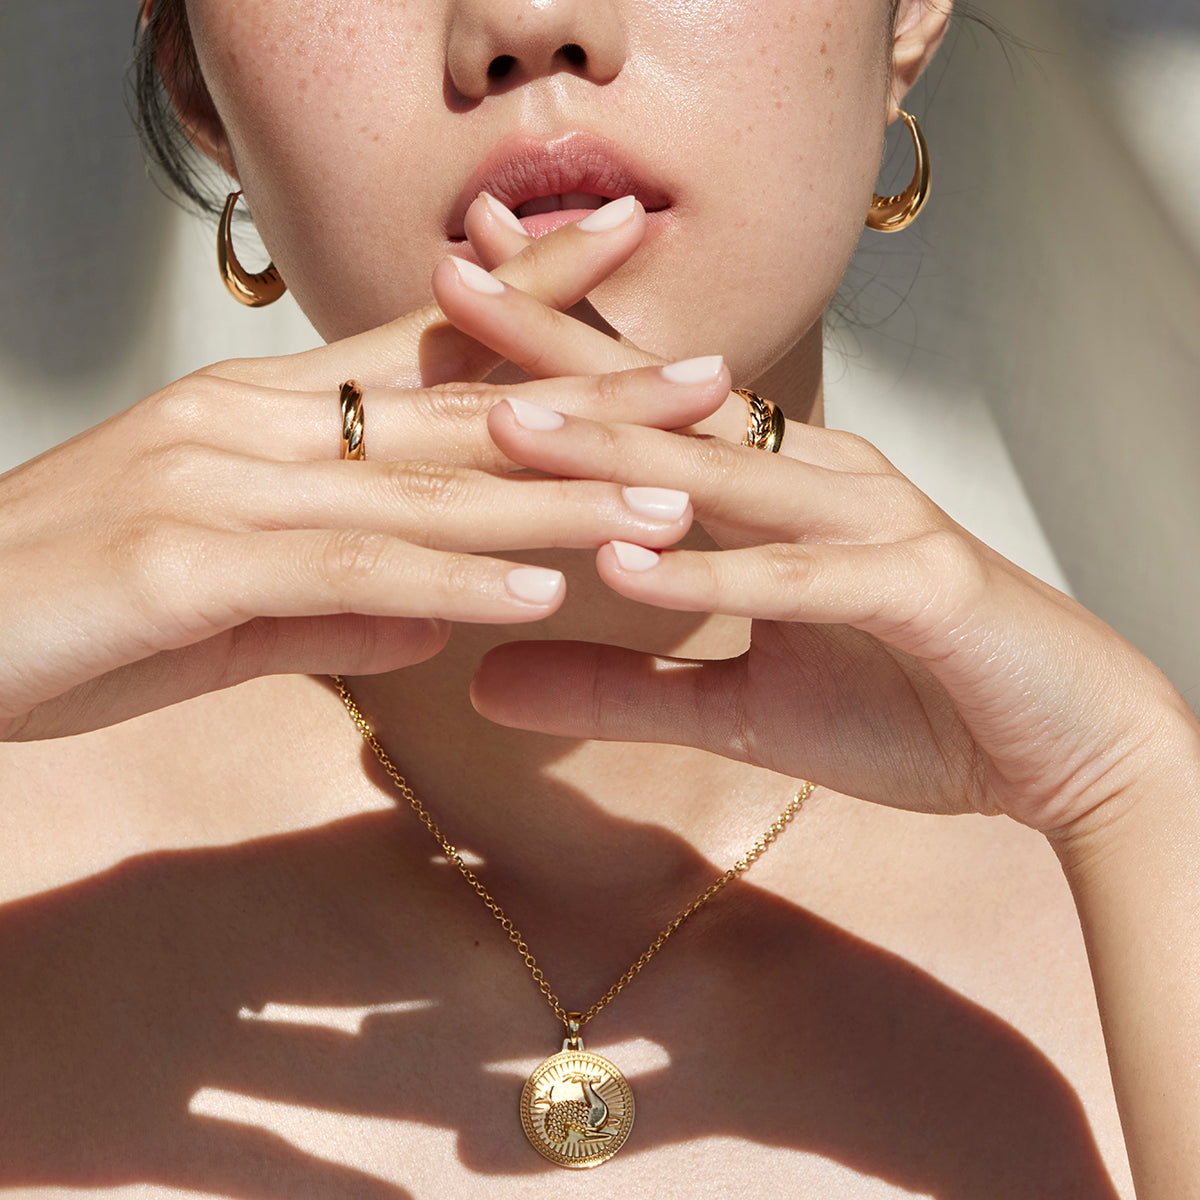 Woman with her hands tented in front of her face wearing Ethical Gold Hoop Earrings, Band Rings, and Capricorn Pendant